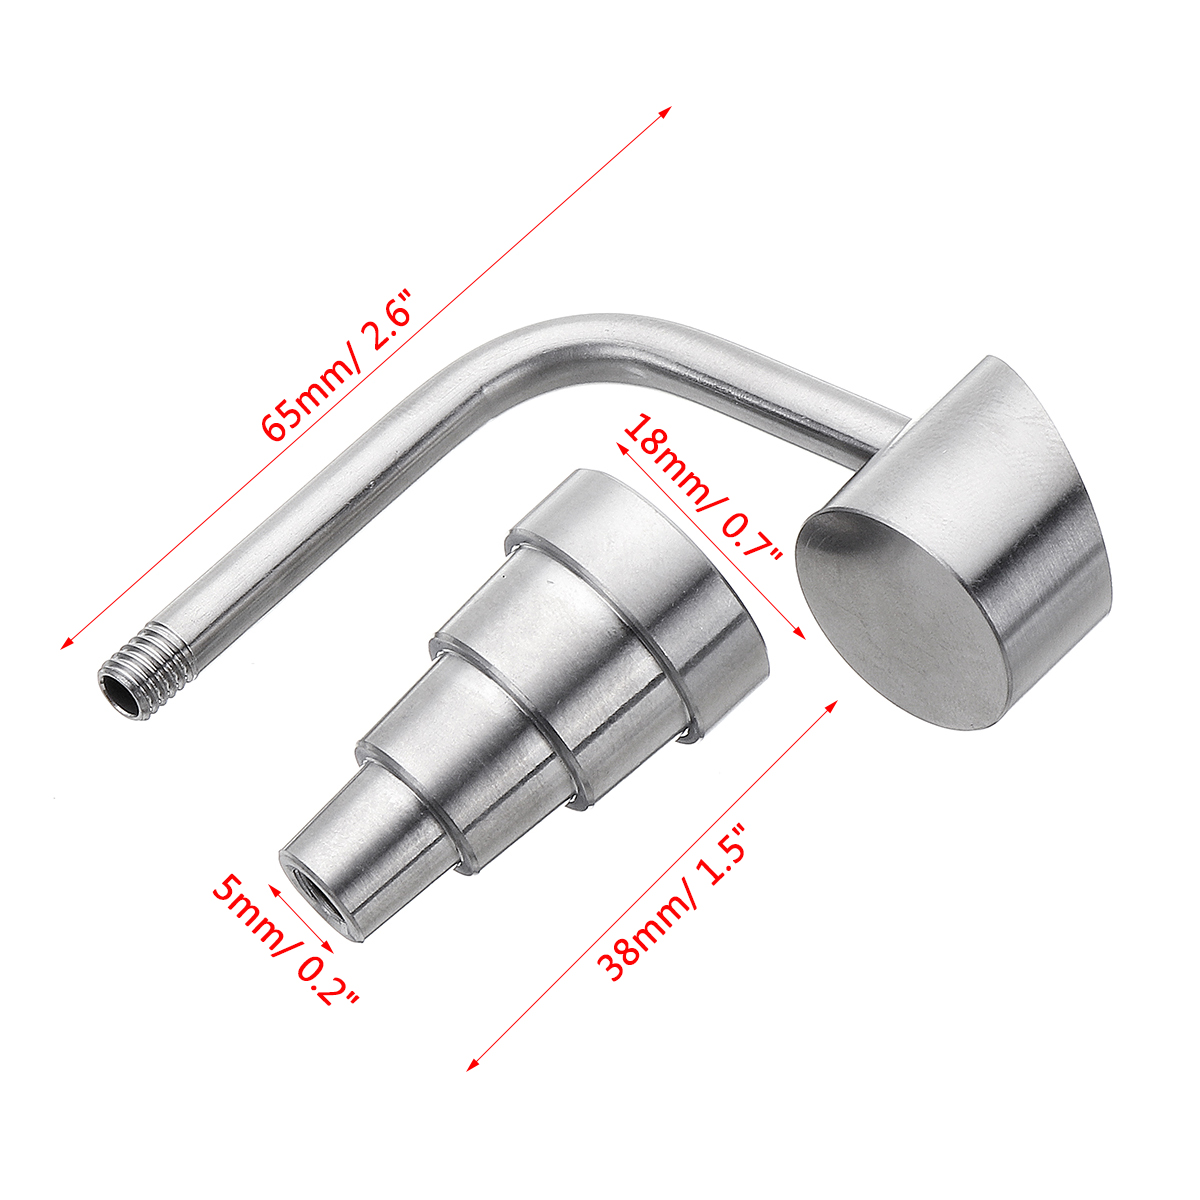 Universal-10mm-14mm-18mm-6-In-1-Domeless-Titanium-Nail-With-Male-and-Female-Joint-Adapter-1426217